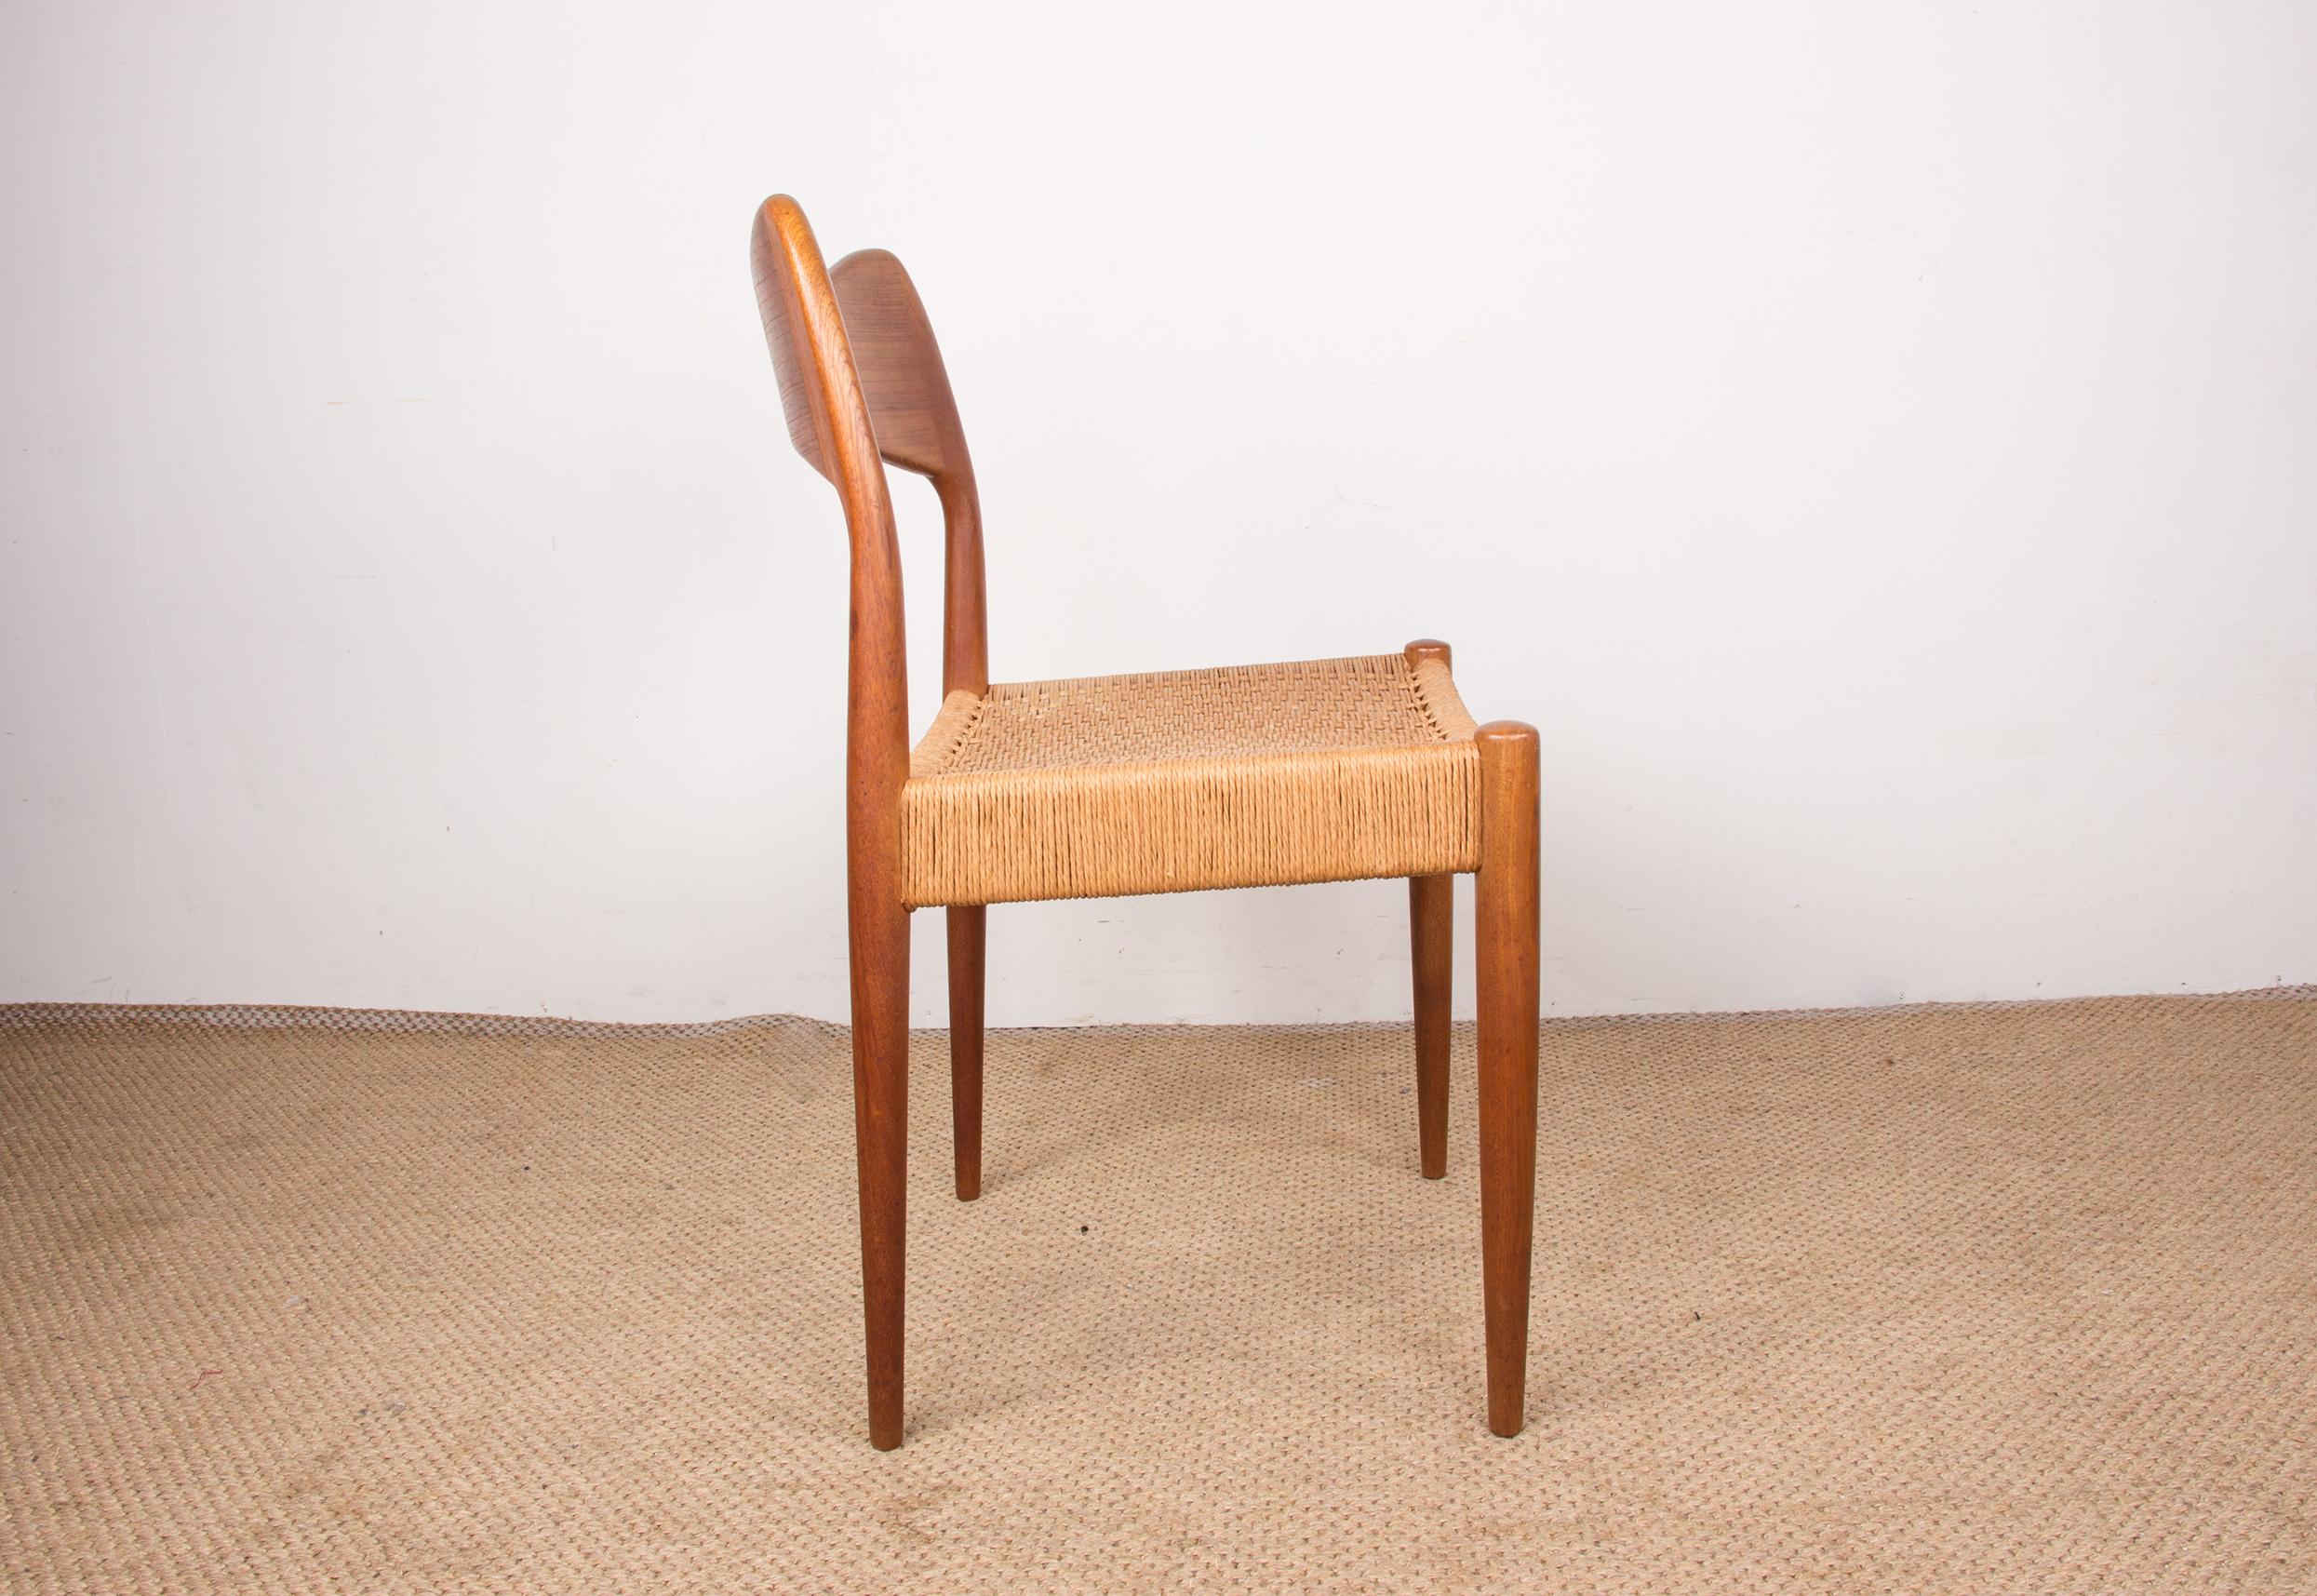 Series of 4 Danish Teak and Cordage chairs by Arne Hovmand Olsen 1960. For Sale 1